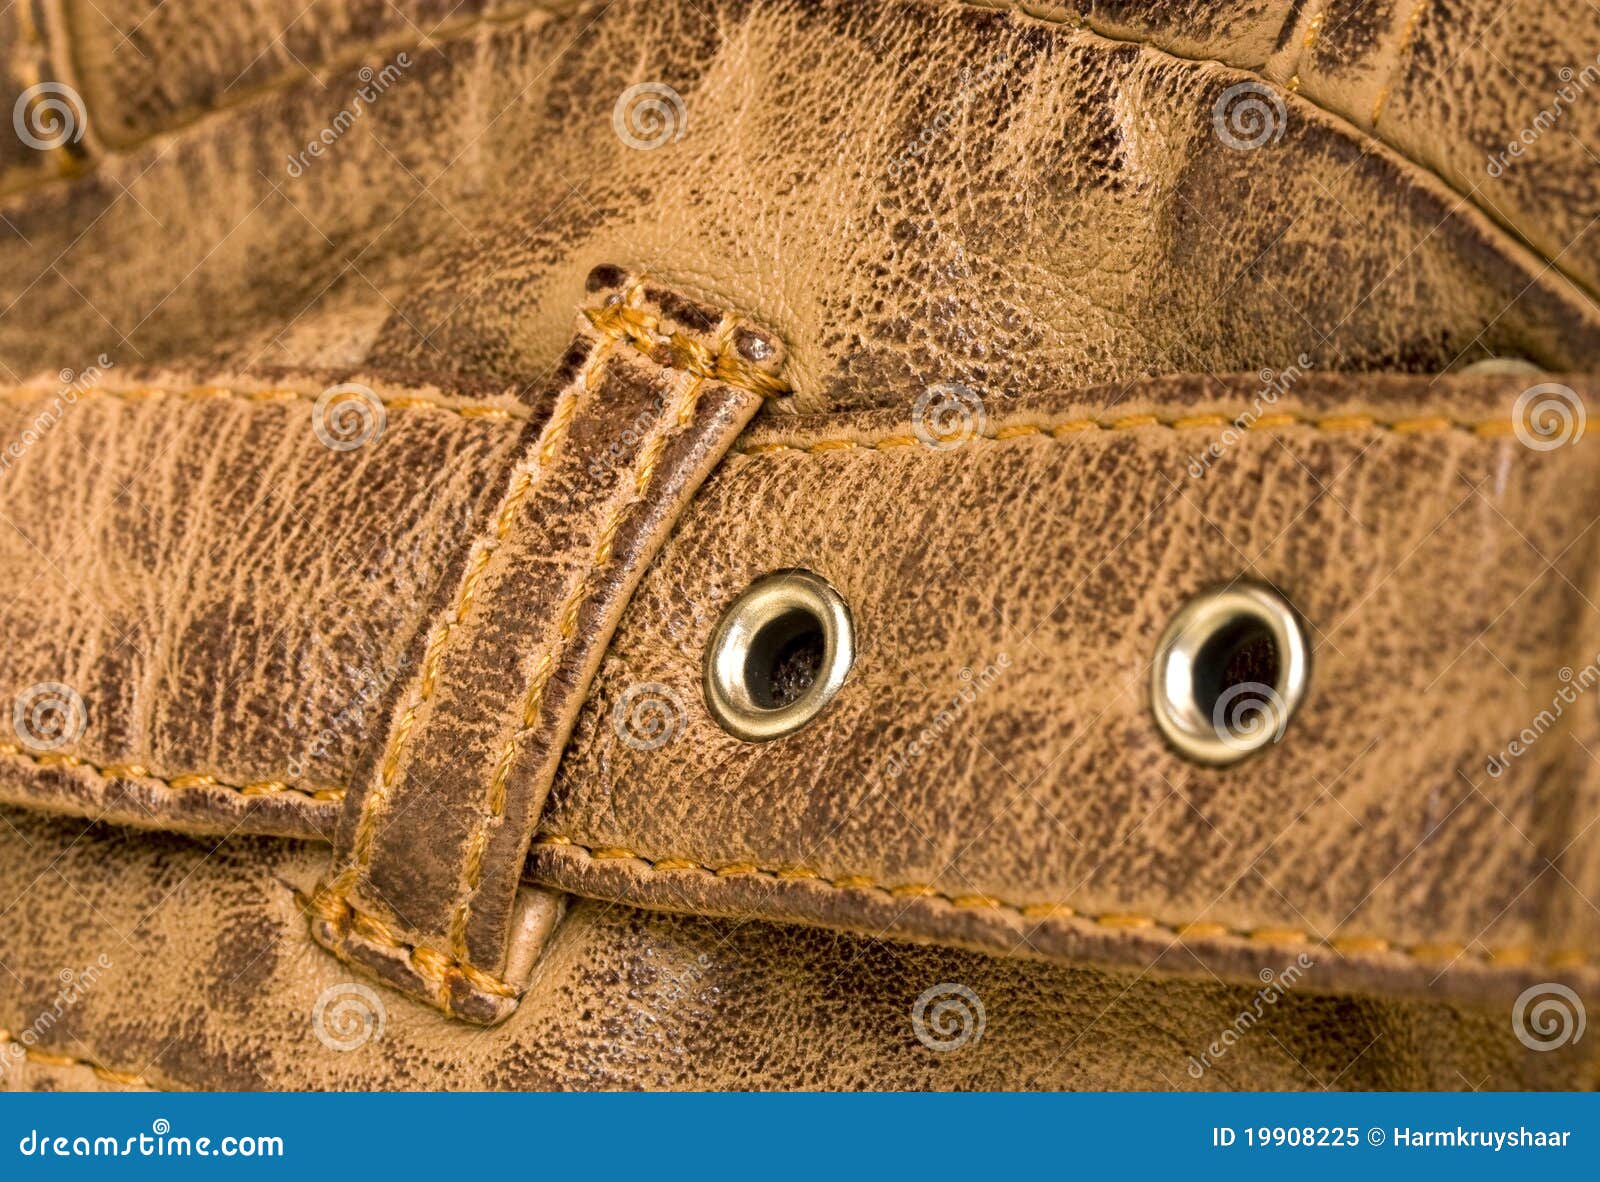 Leather Strap Showing Texture Stock Image - Image of clothing, cracked ...